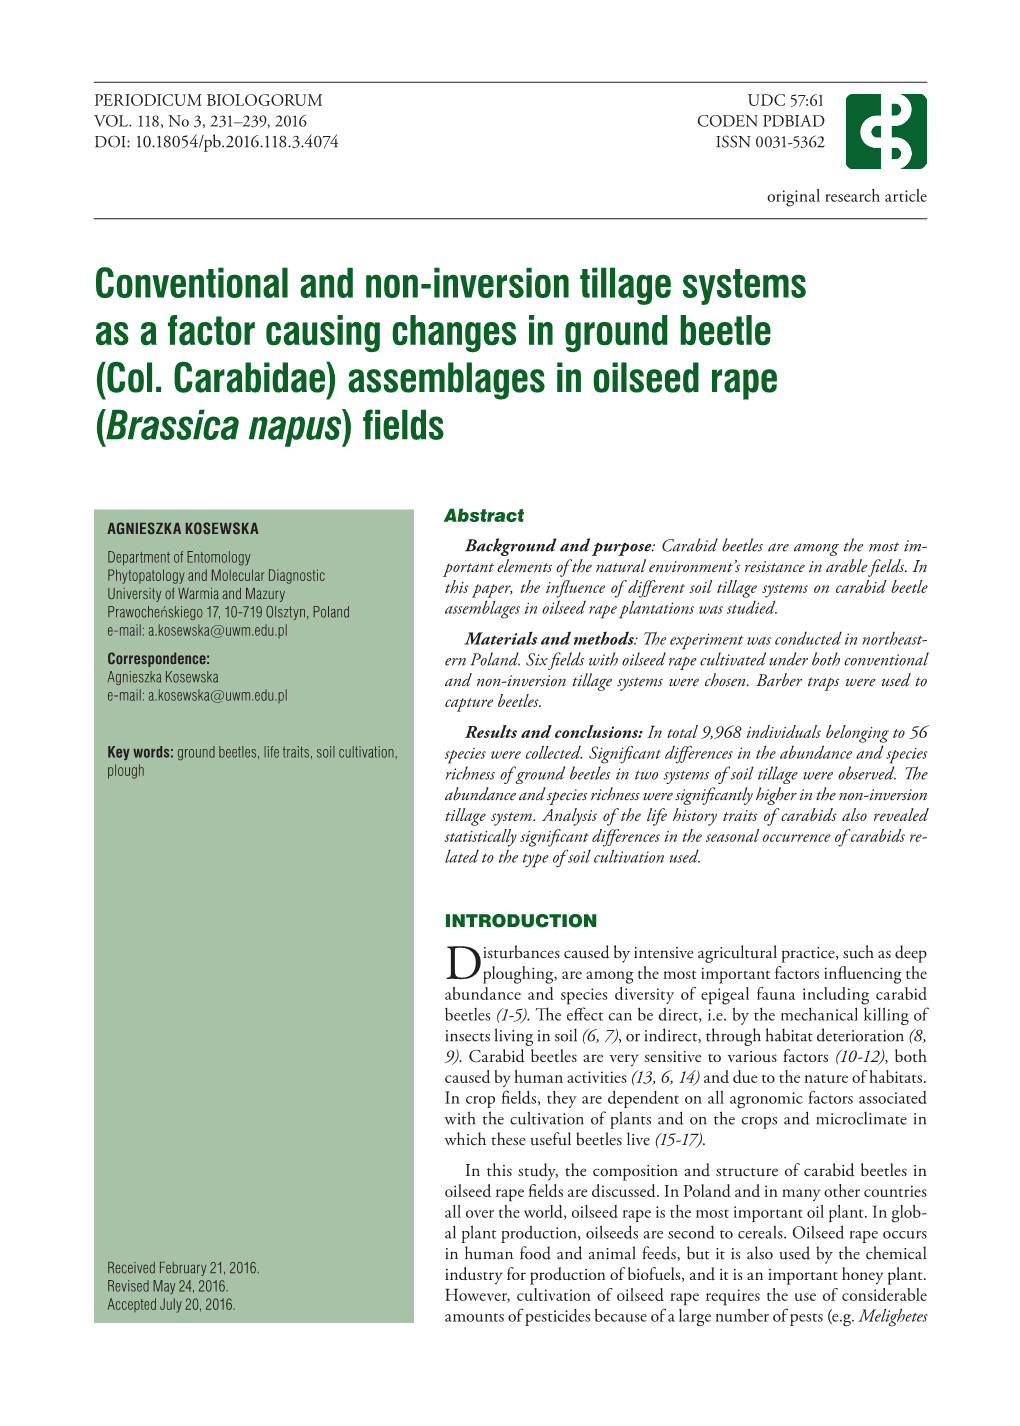 Conventional and Non-Inversion Tillage Systems As a Factor Causing Changes in Ground Beetle (Col